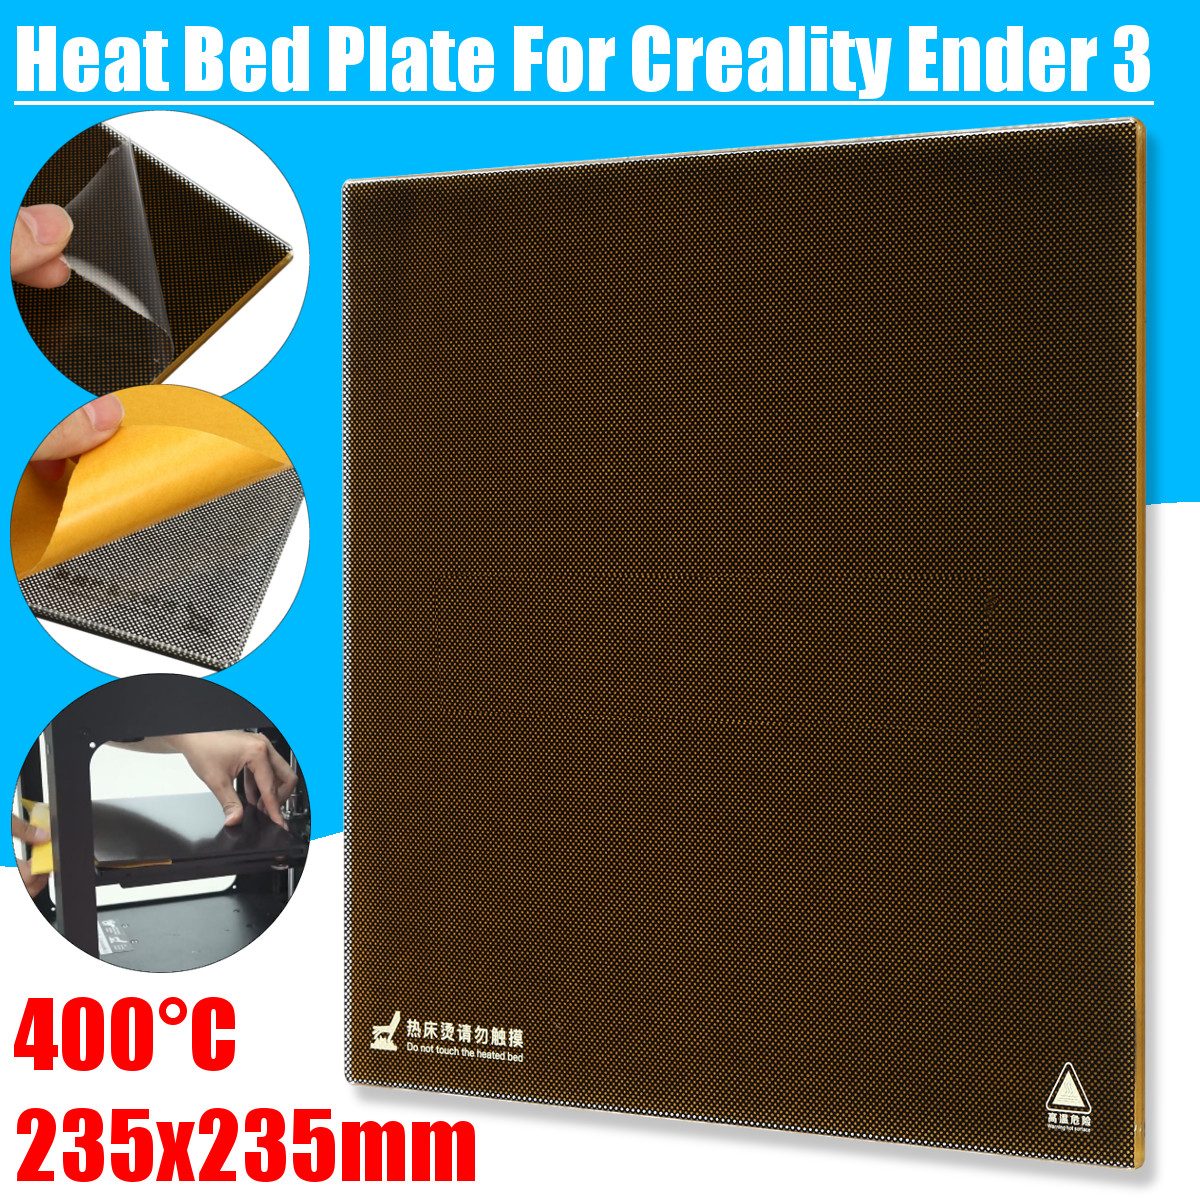 3D-Printing-Heating-Block-235mm-X-235mm-Square-Build-Surface-Sticker-Sheet-for-3D-Printer-Hot-Bed-1599022-2